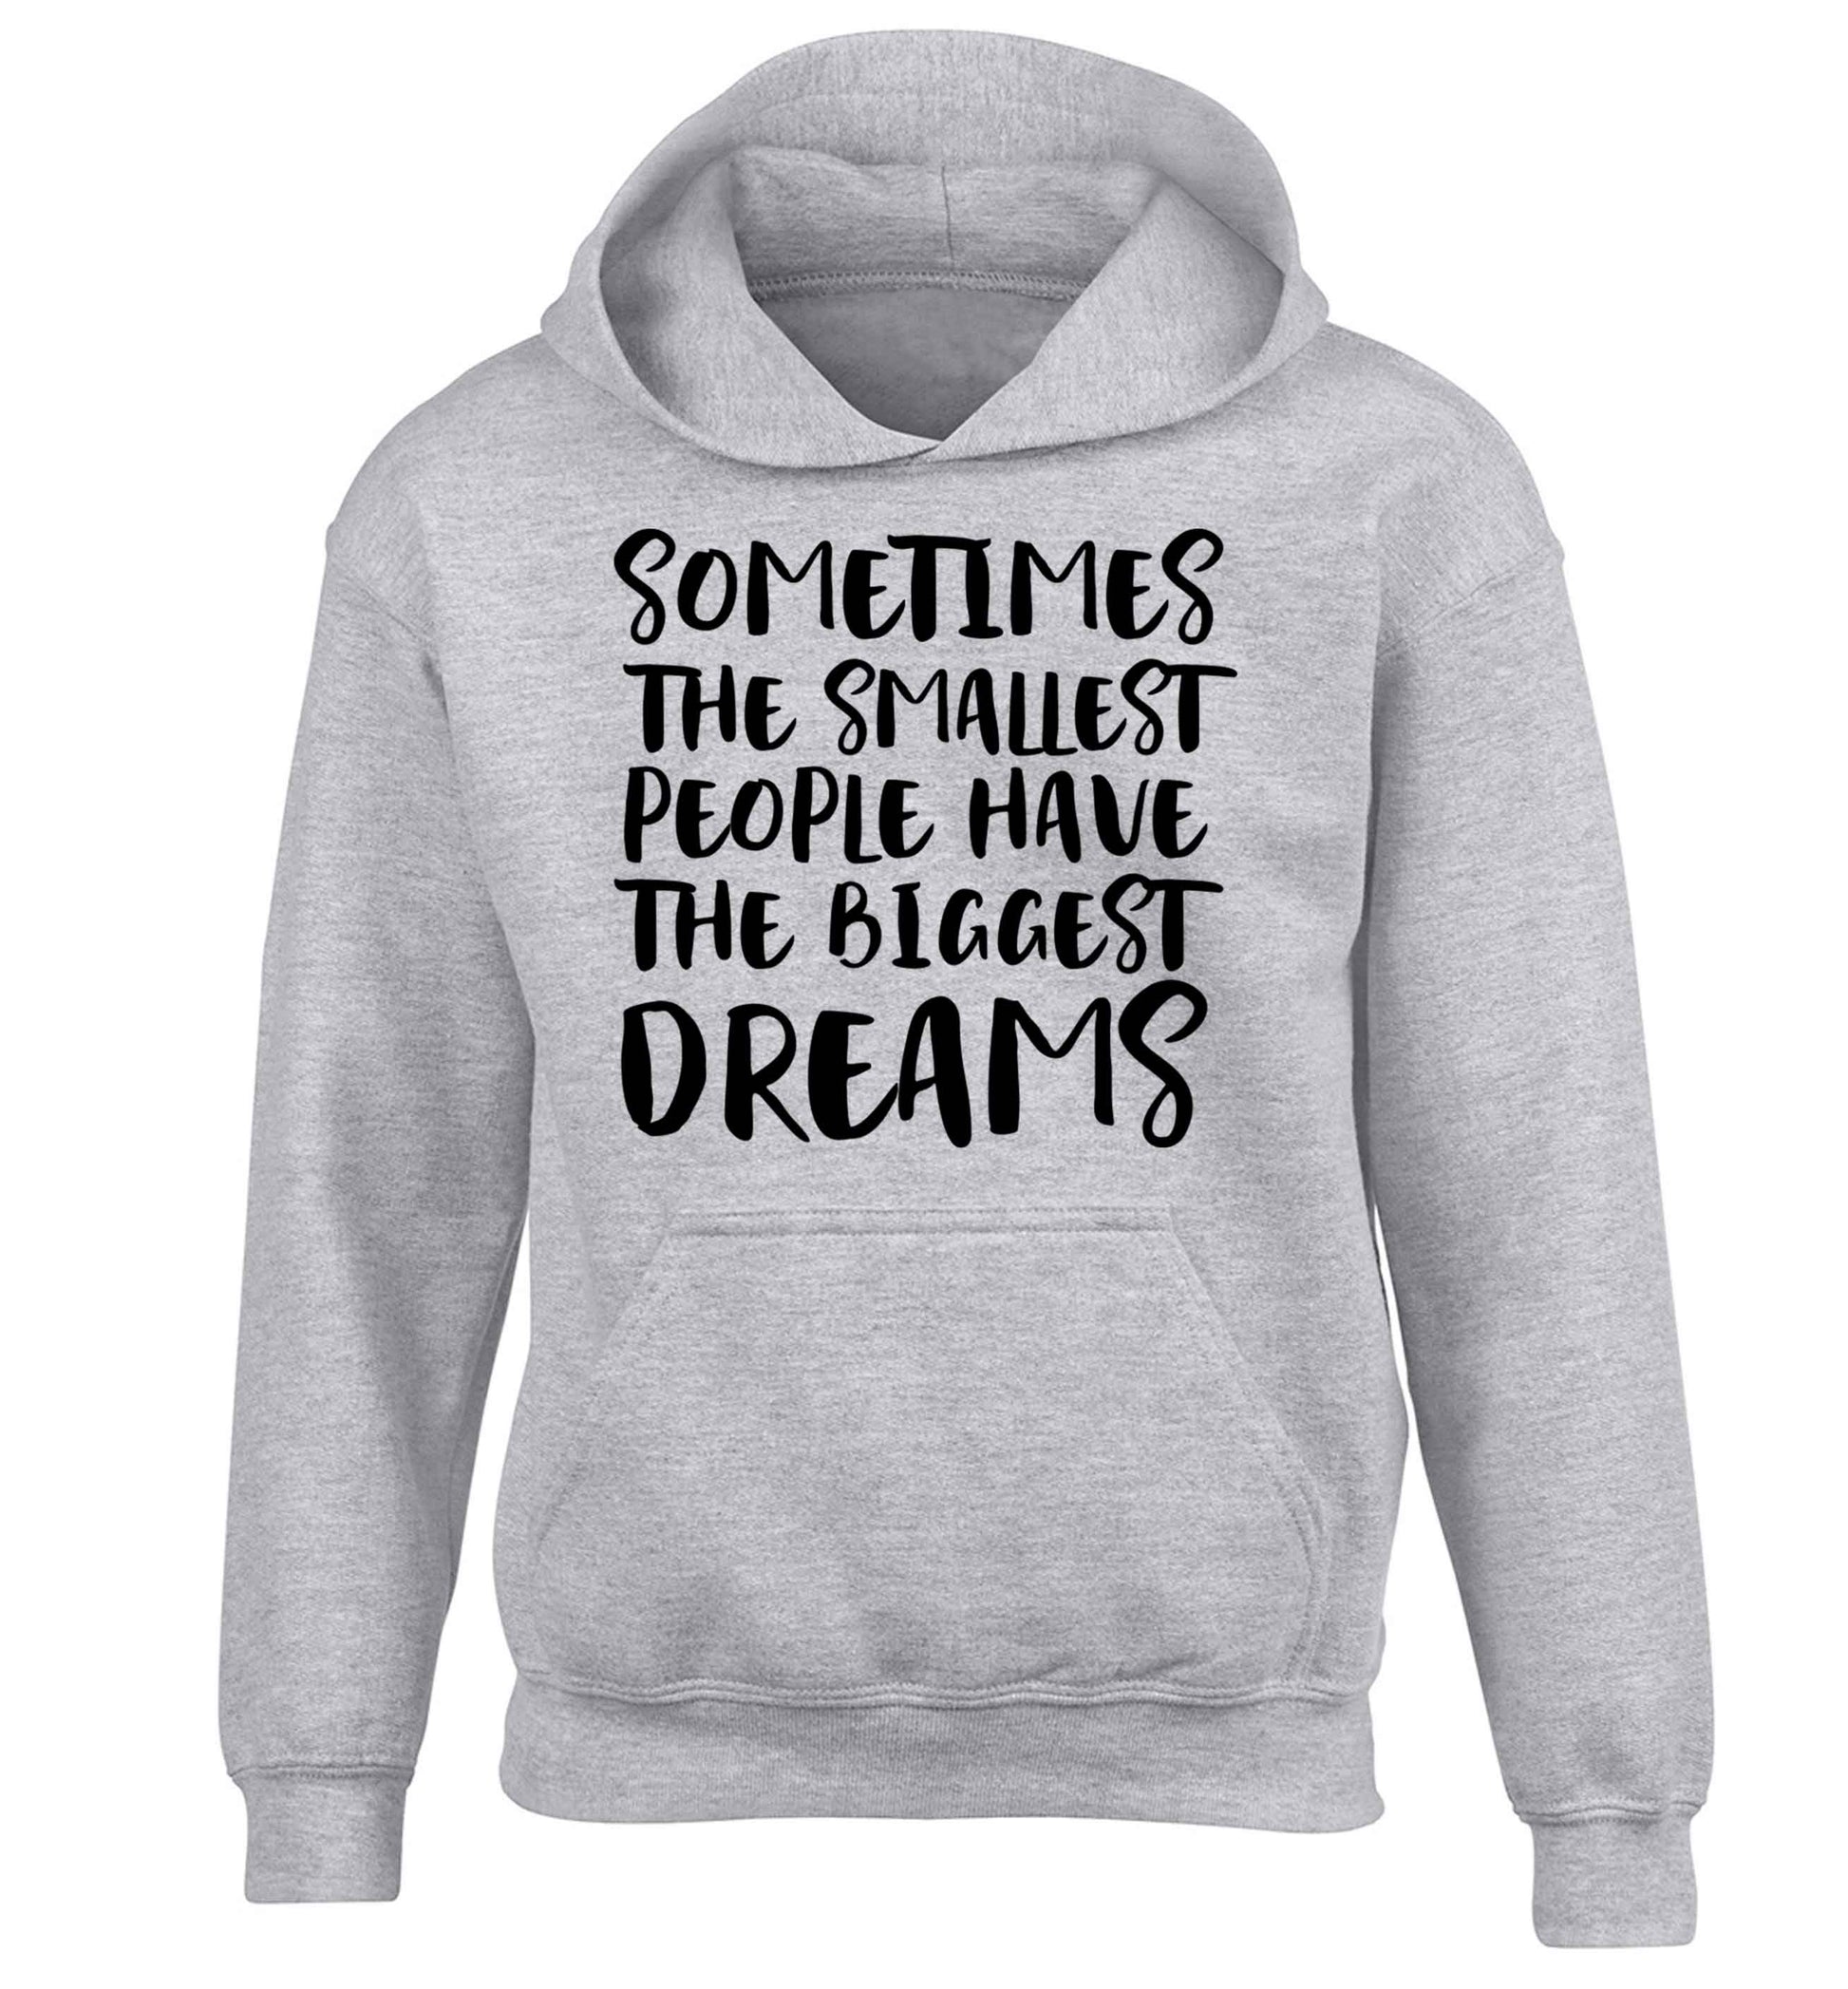 Sometimes the smallest people have the biggest dreams children's grey hoodie 12-13 Years